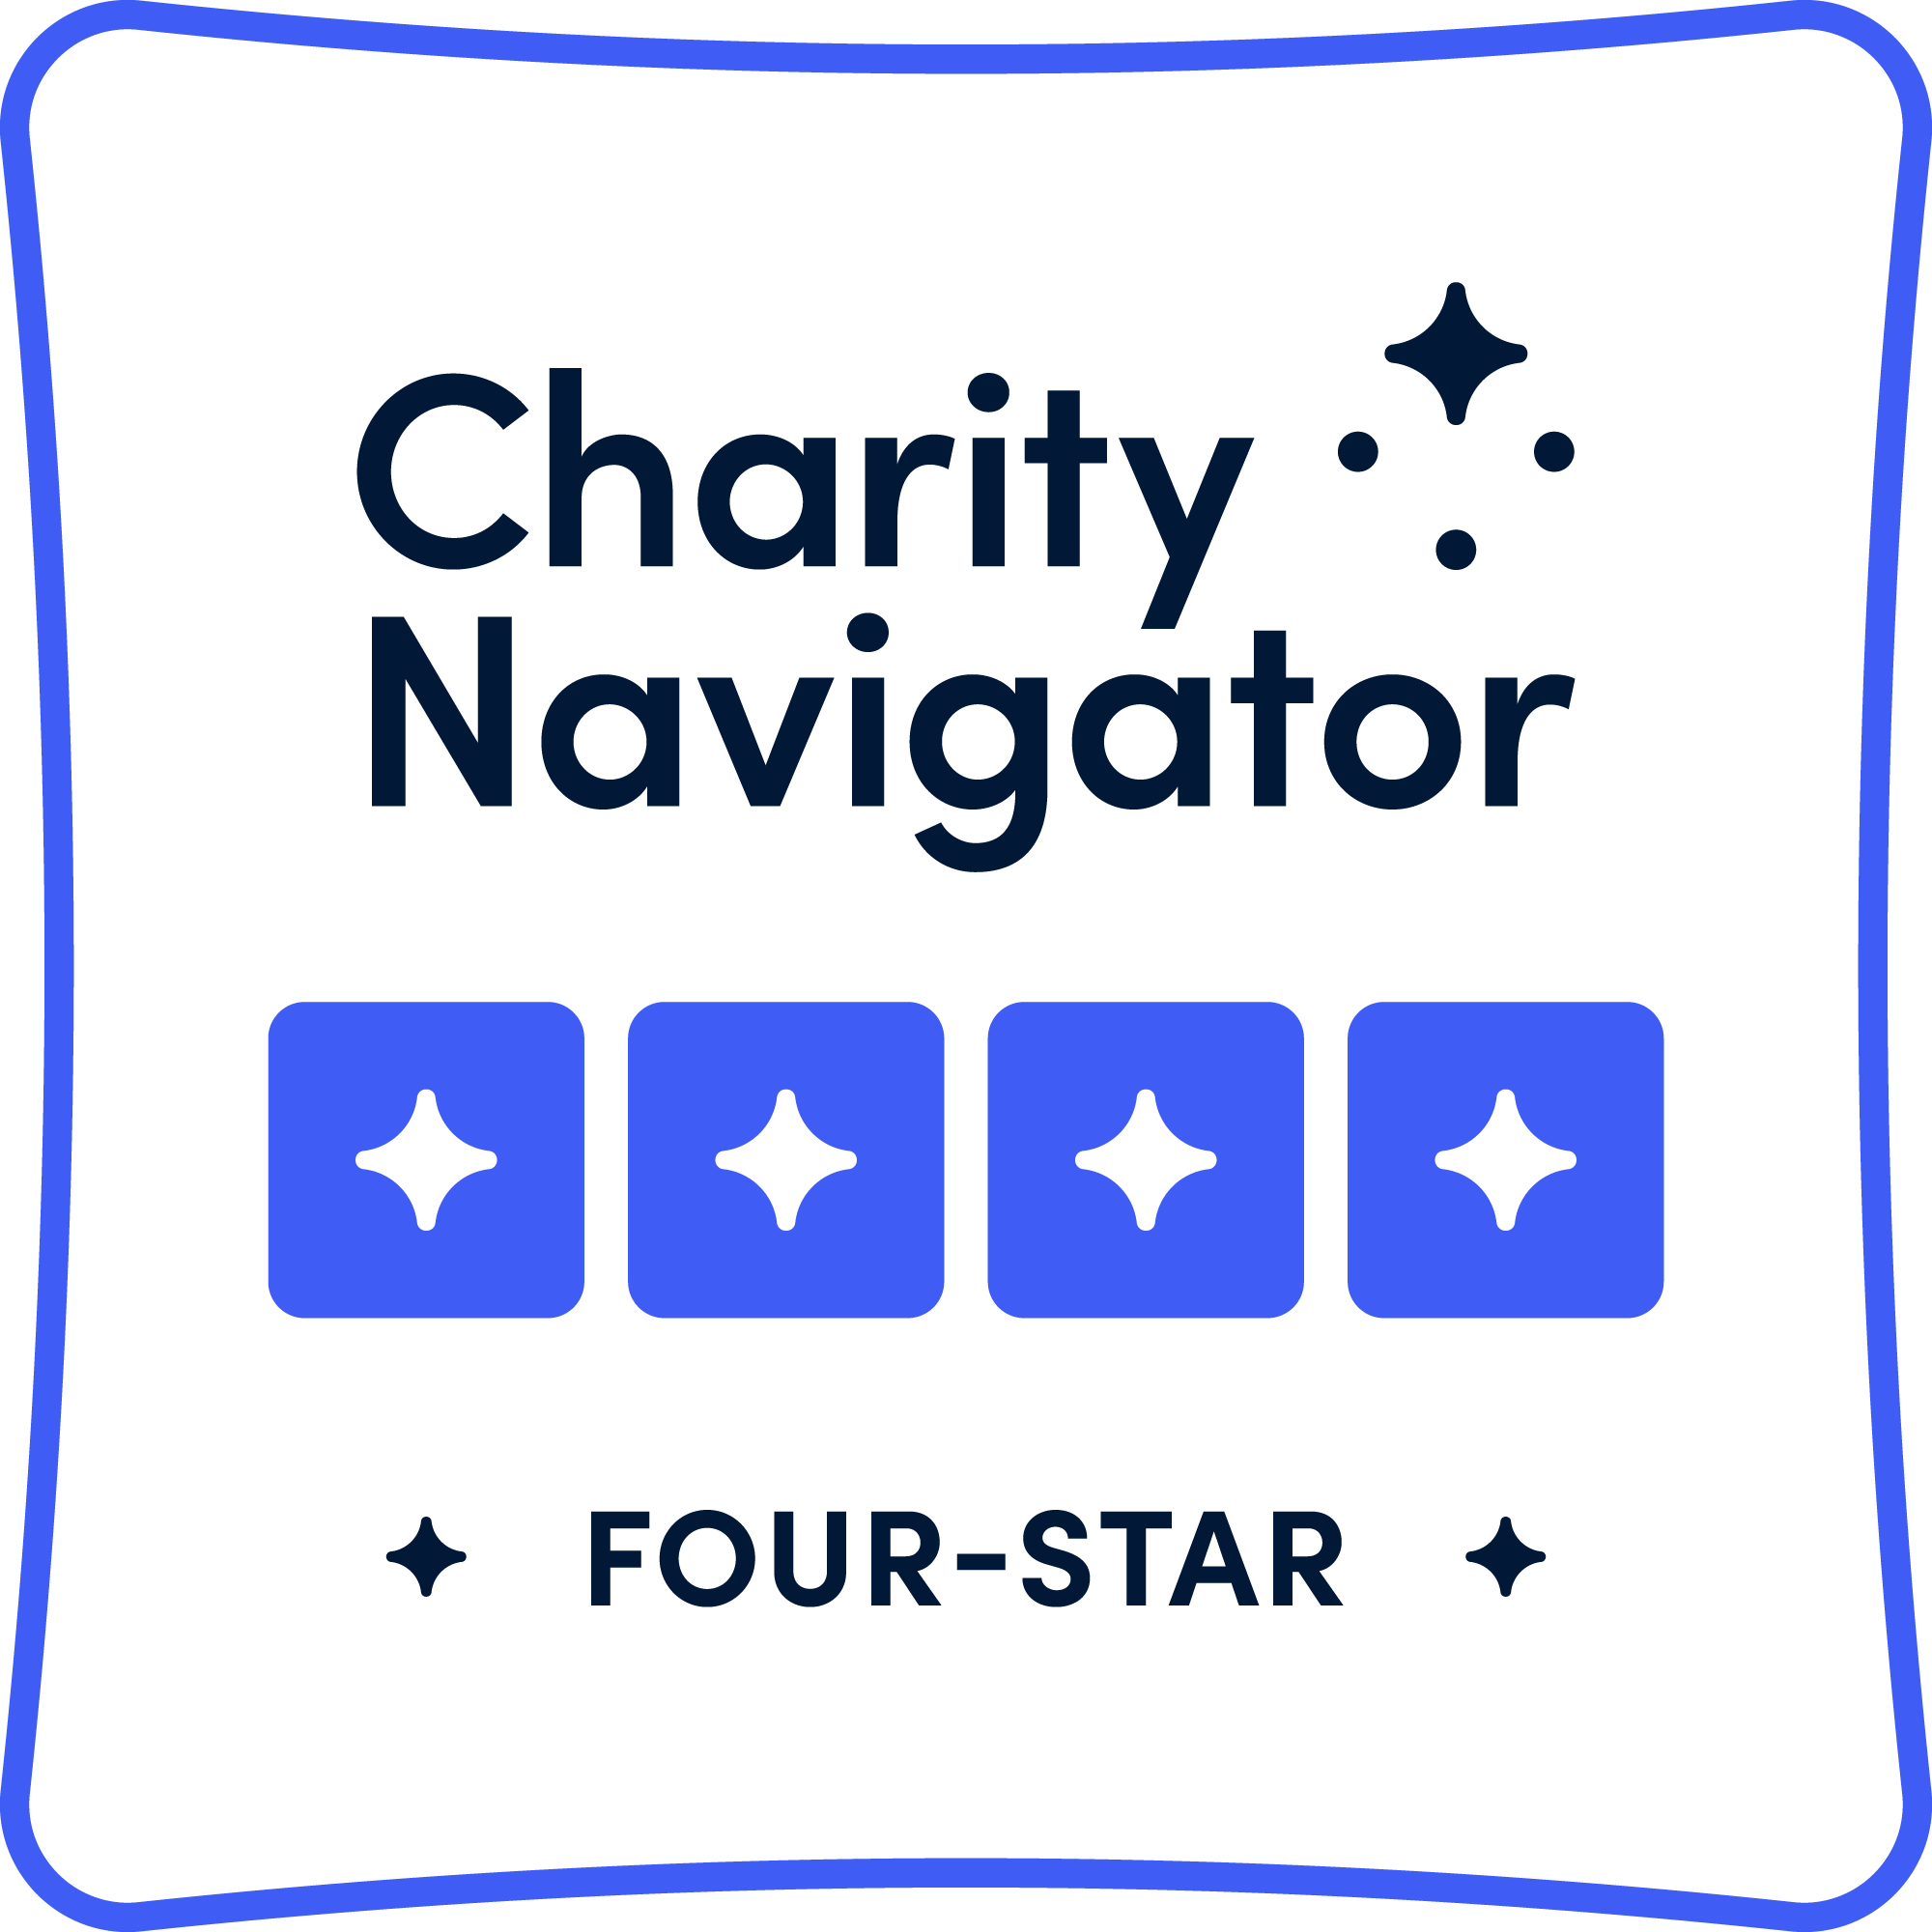 Charity Navigater - Four Star rating